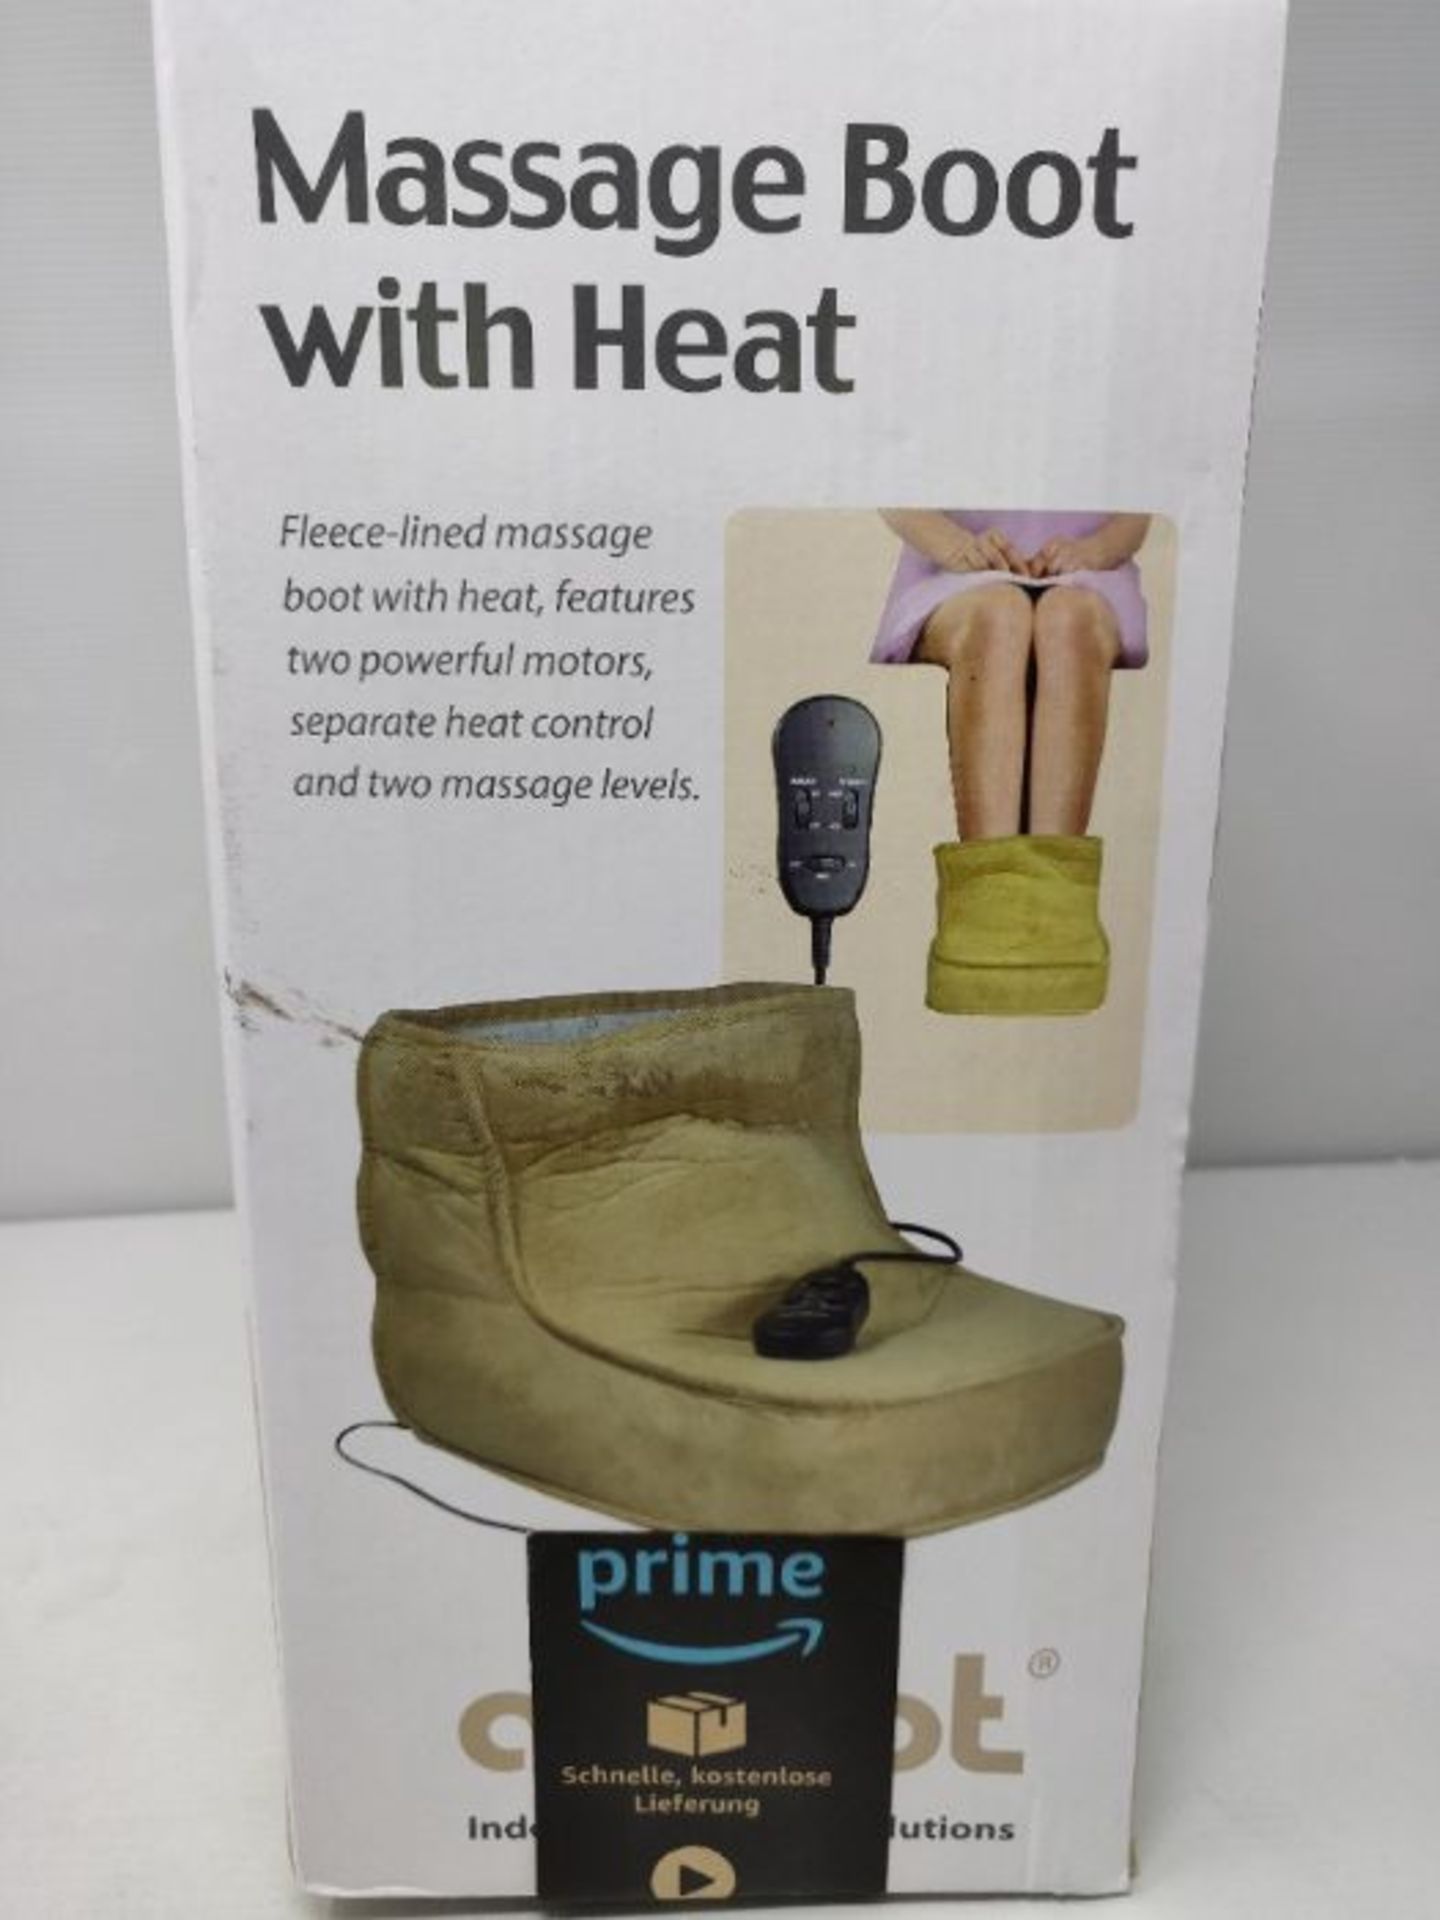 Aidapt Soft Relaxing Dual Speed Electric Foot Massage & Heated Foot Warmer Boot (Brown - Image 3 of 3